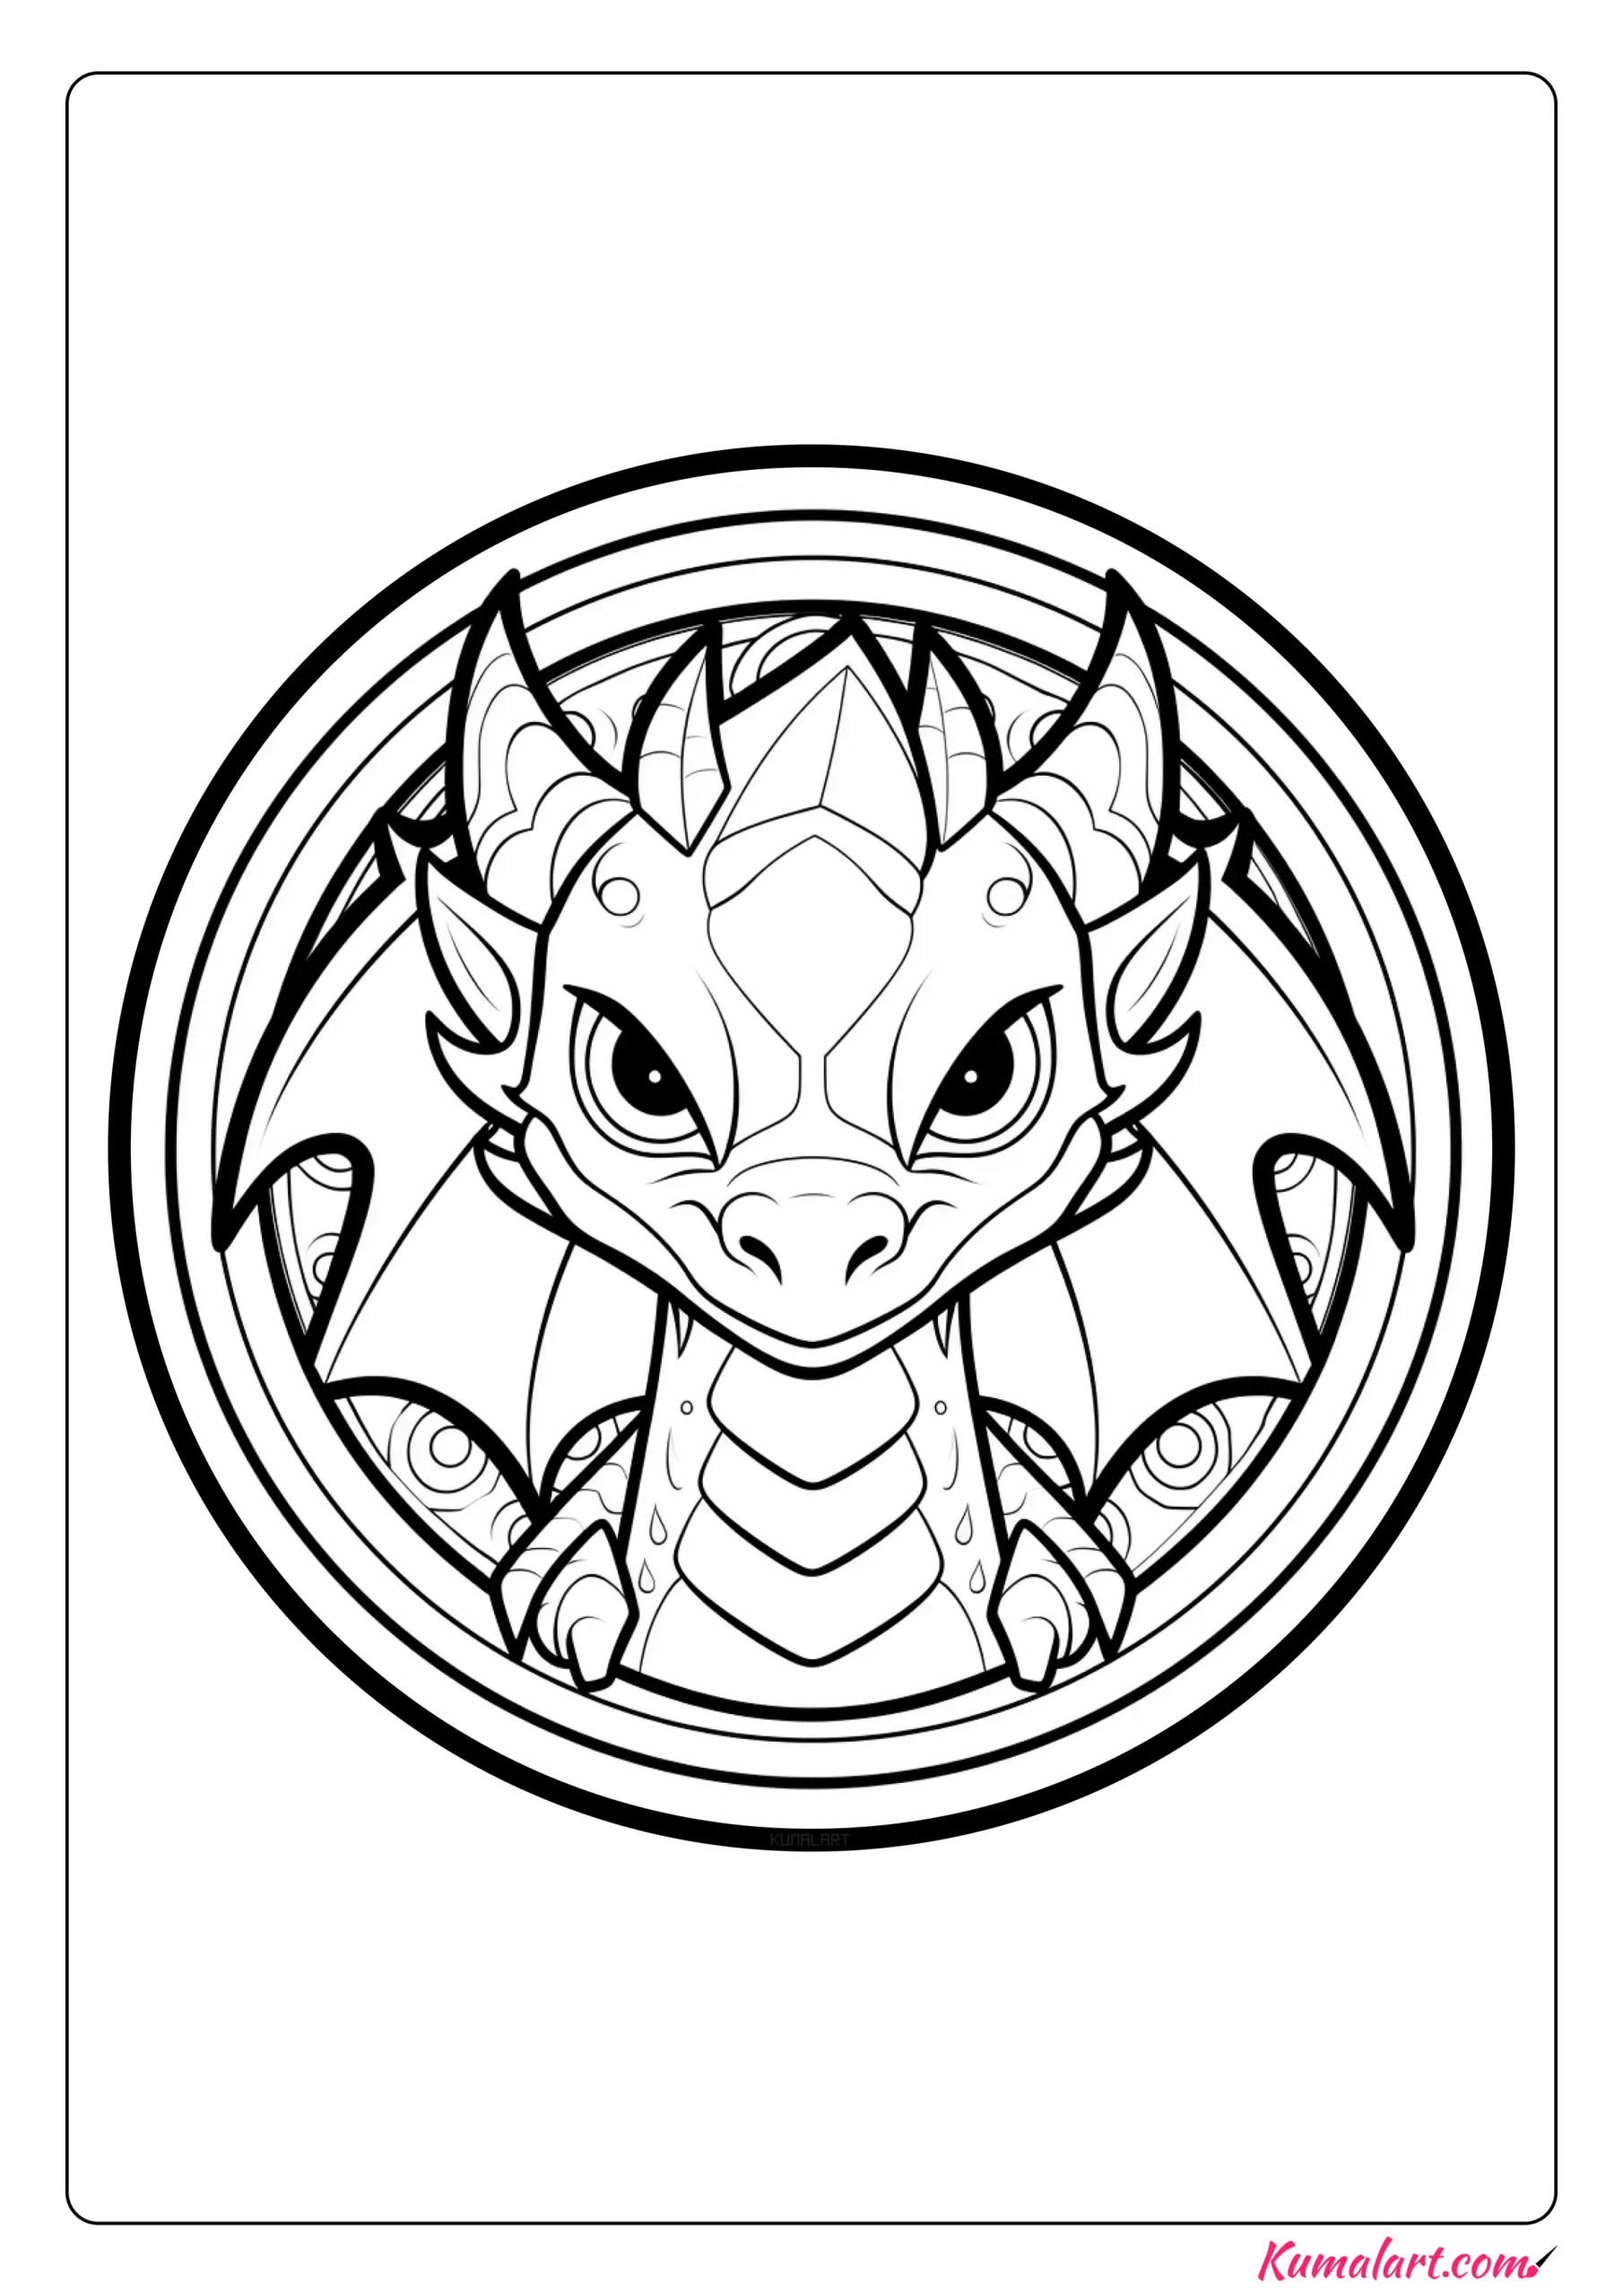 Lucja The Dragon Coloring Page (Printable A4 Page)